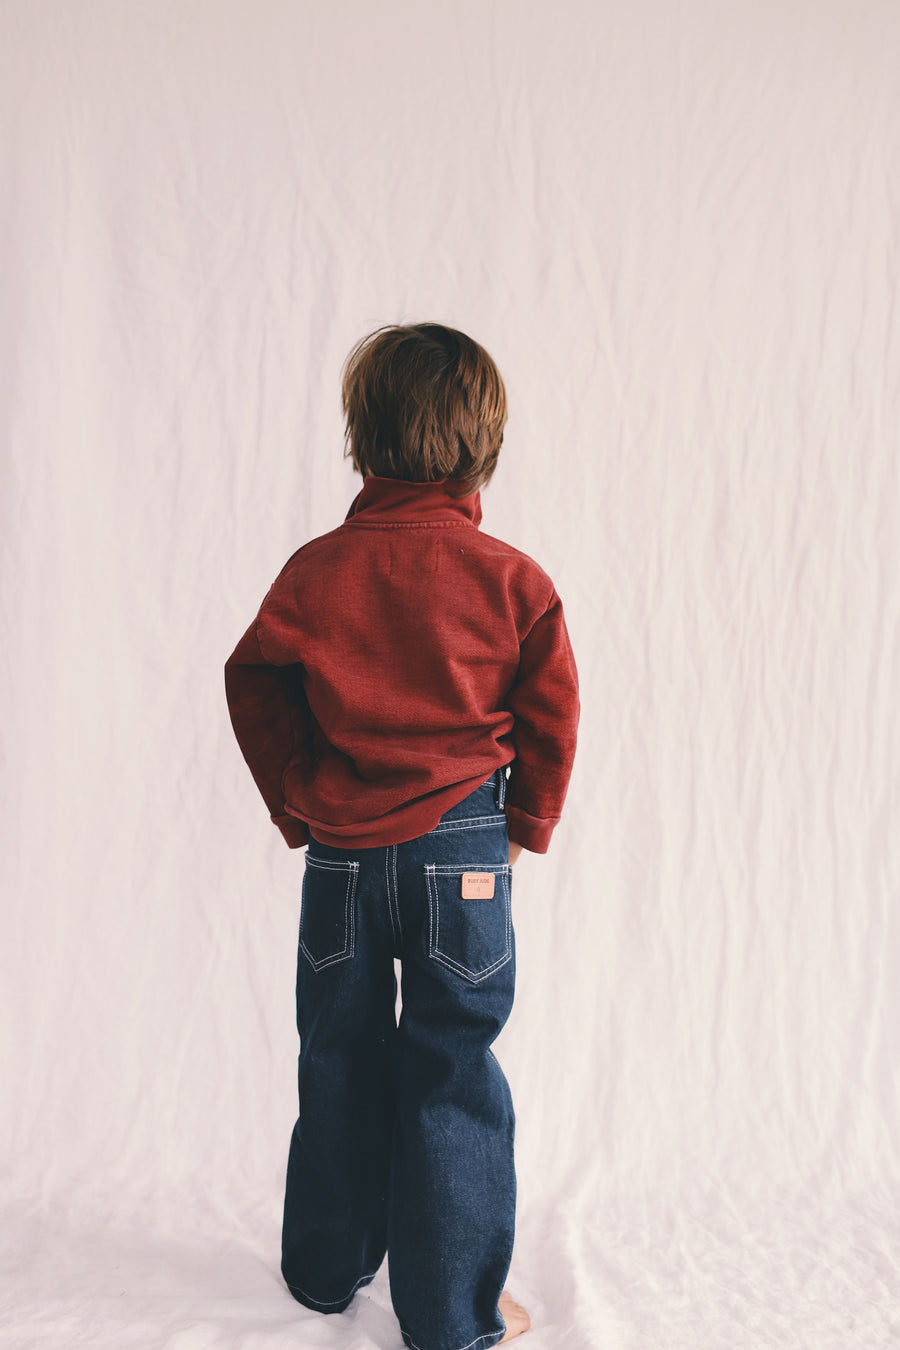 Kids Utility Jeans Rudy Jude